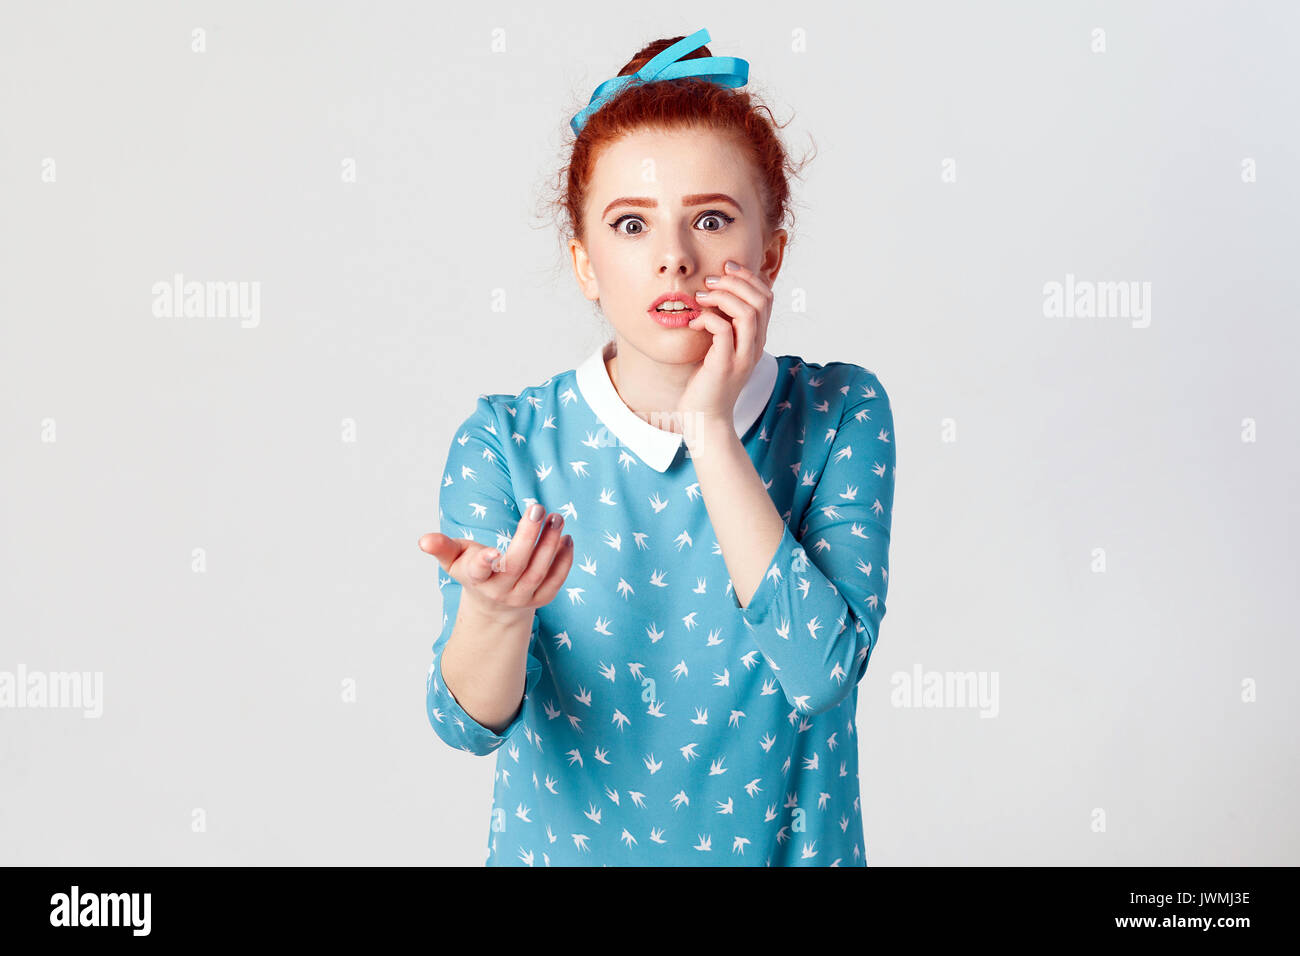 Human facial expressions, emotions and feelings. Beautiful redhead girl with hair knot having scared and frightened look, keeping mouth open, touching Stock Photo